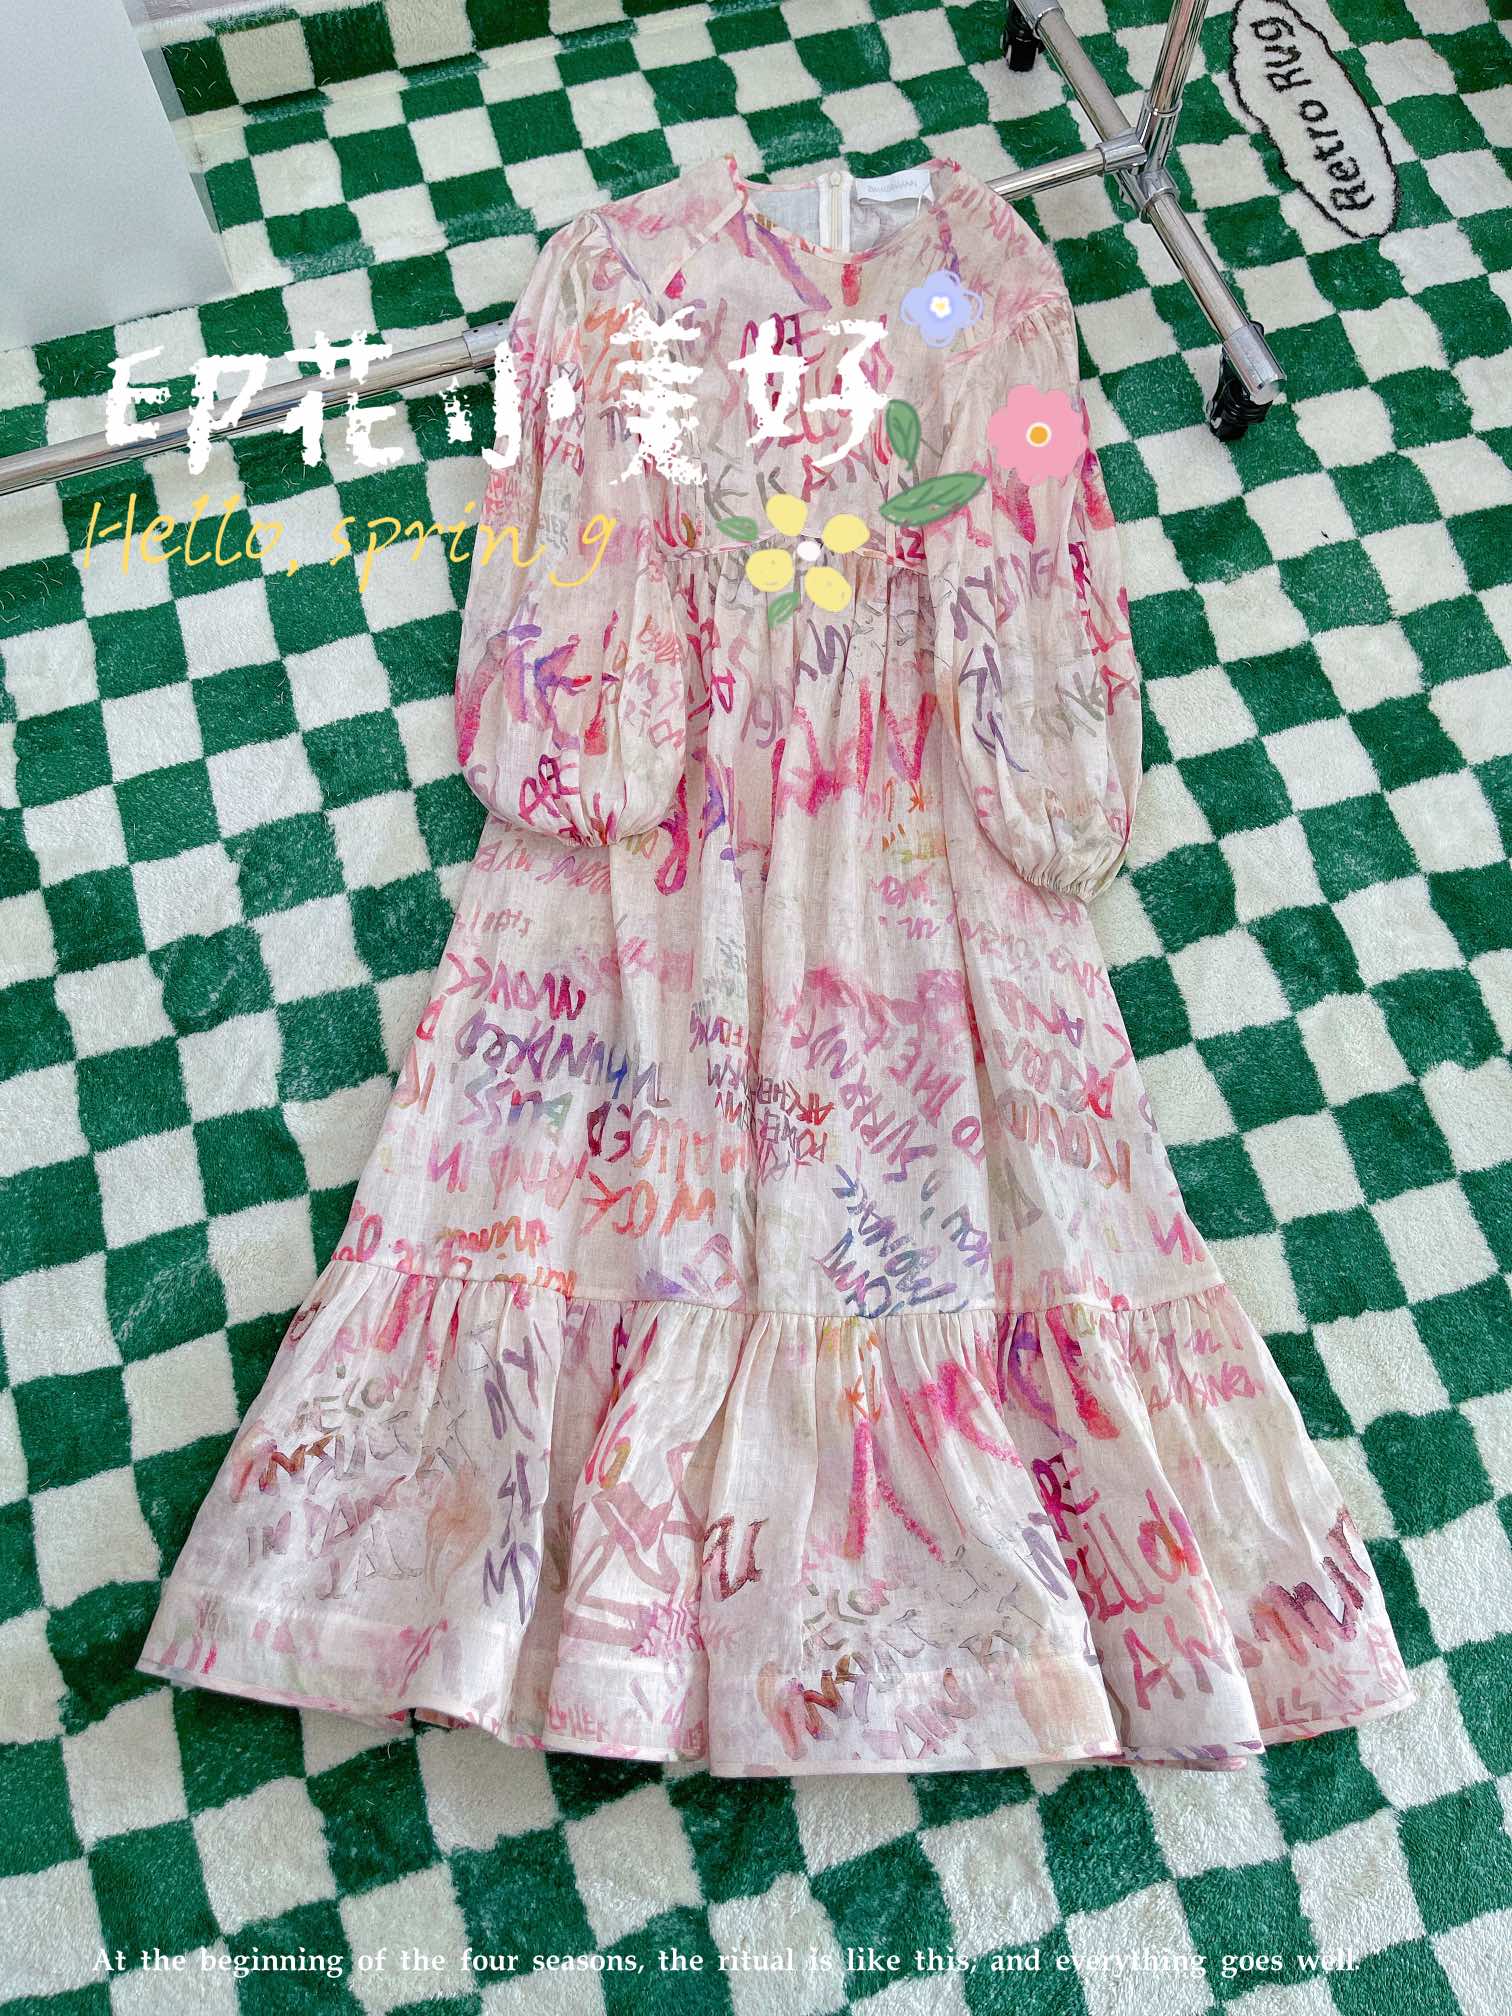 

ZM 2022 New printed letter long skirt dress Valentine's Day birthday Mother's Day luxury clothing floral pattern famous Australian clothing brand, Multi